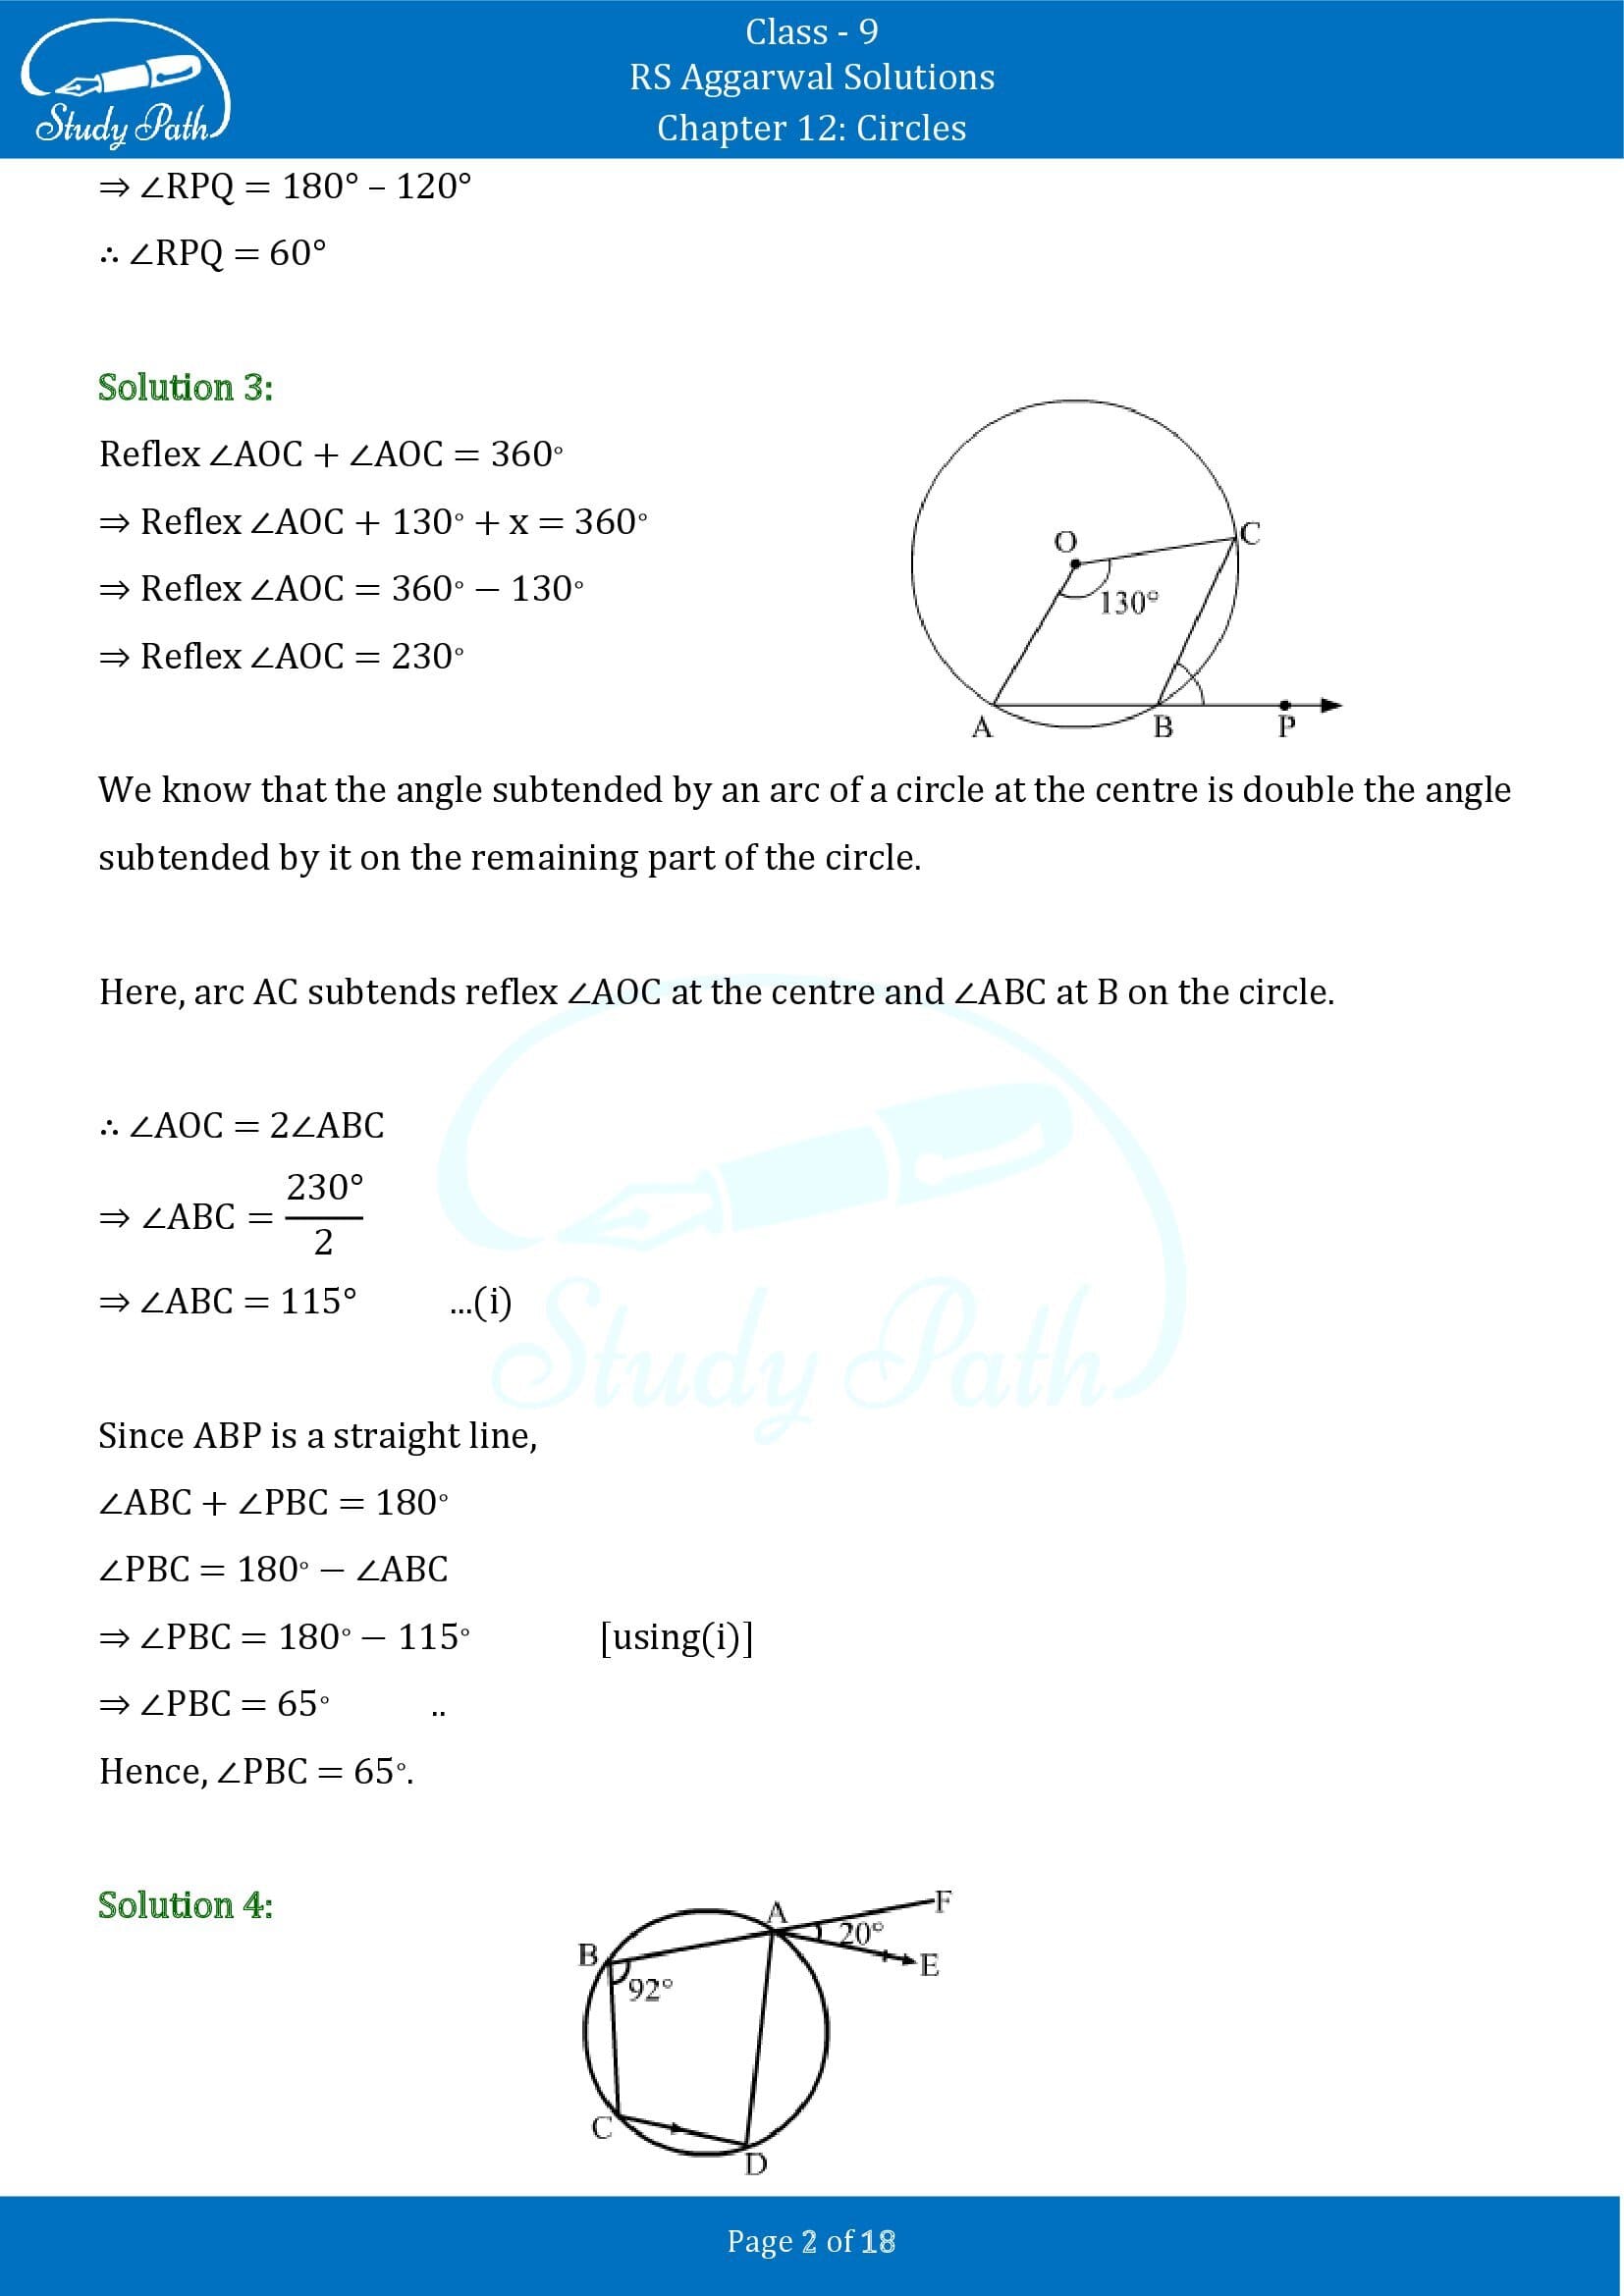 RS Aggarwal Solutions Class 9 Chapter 12 Circles Exercise 12C 00002